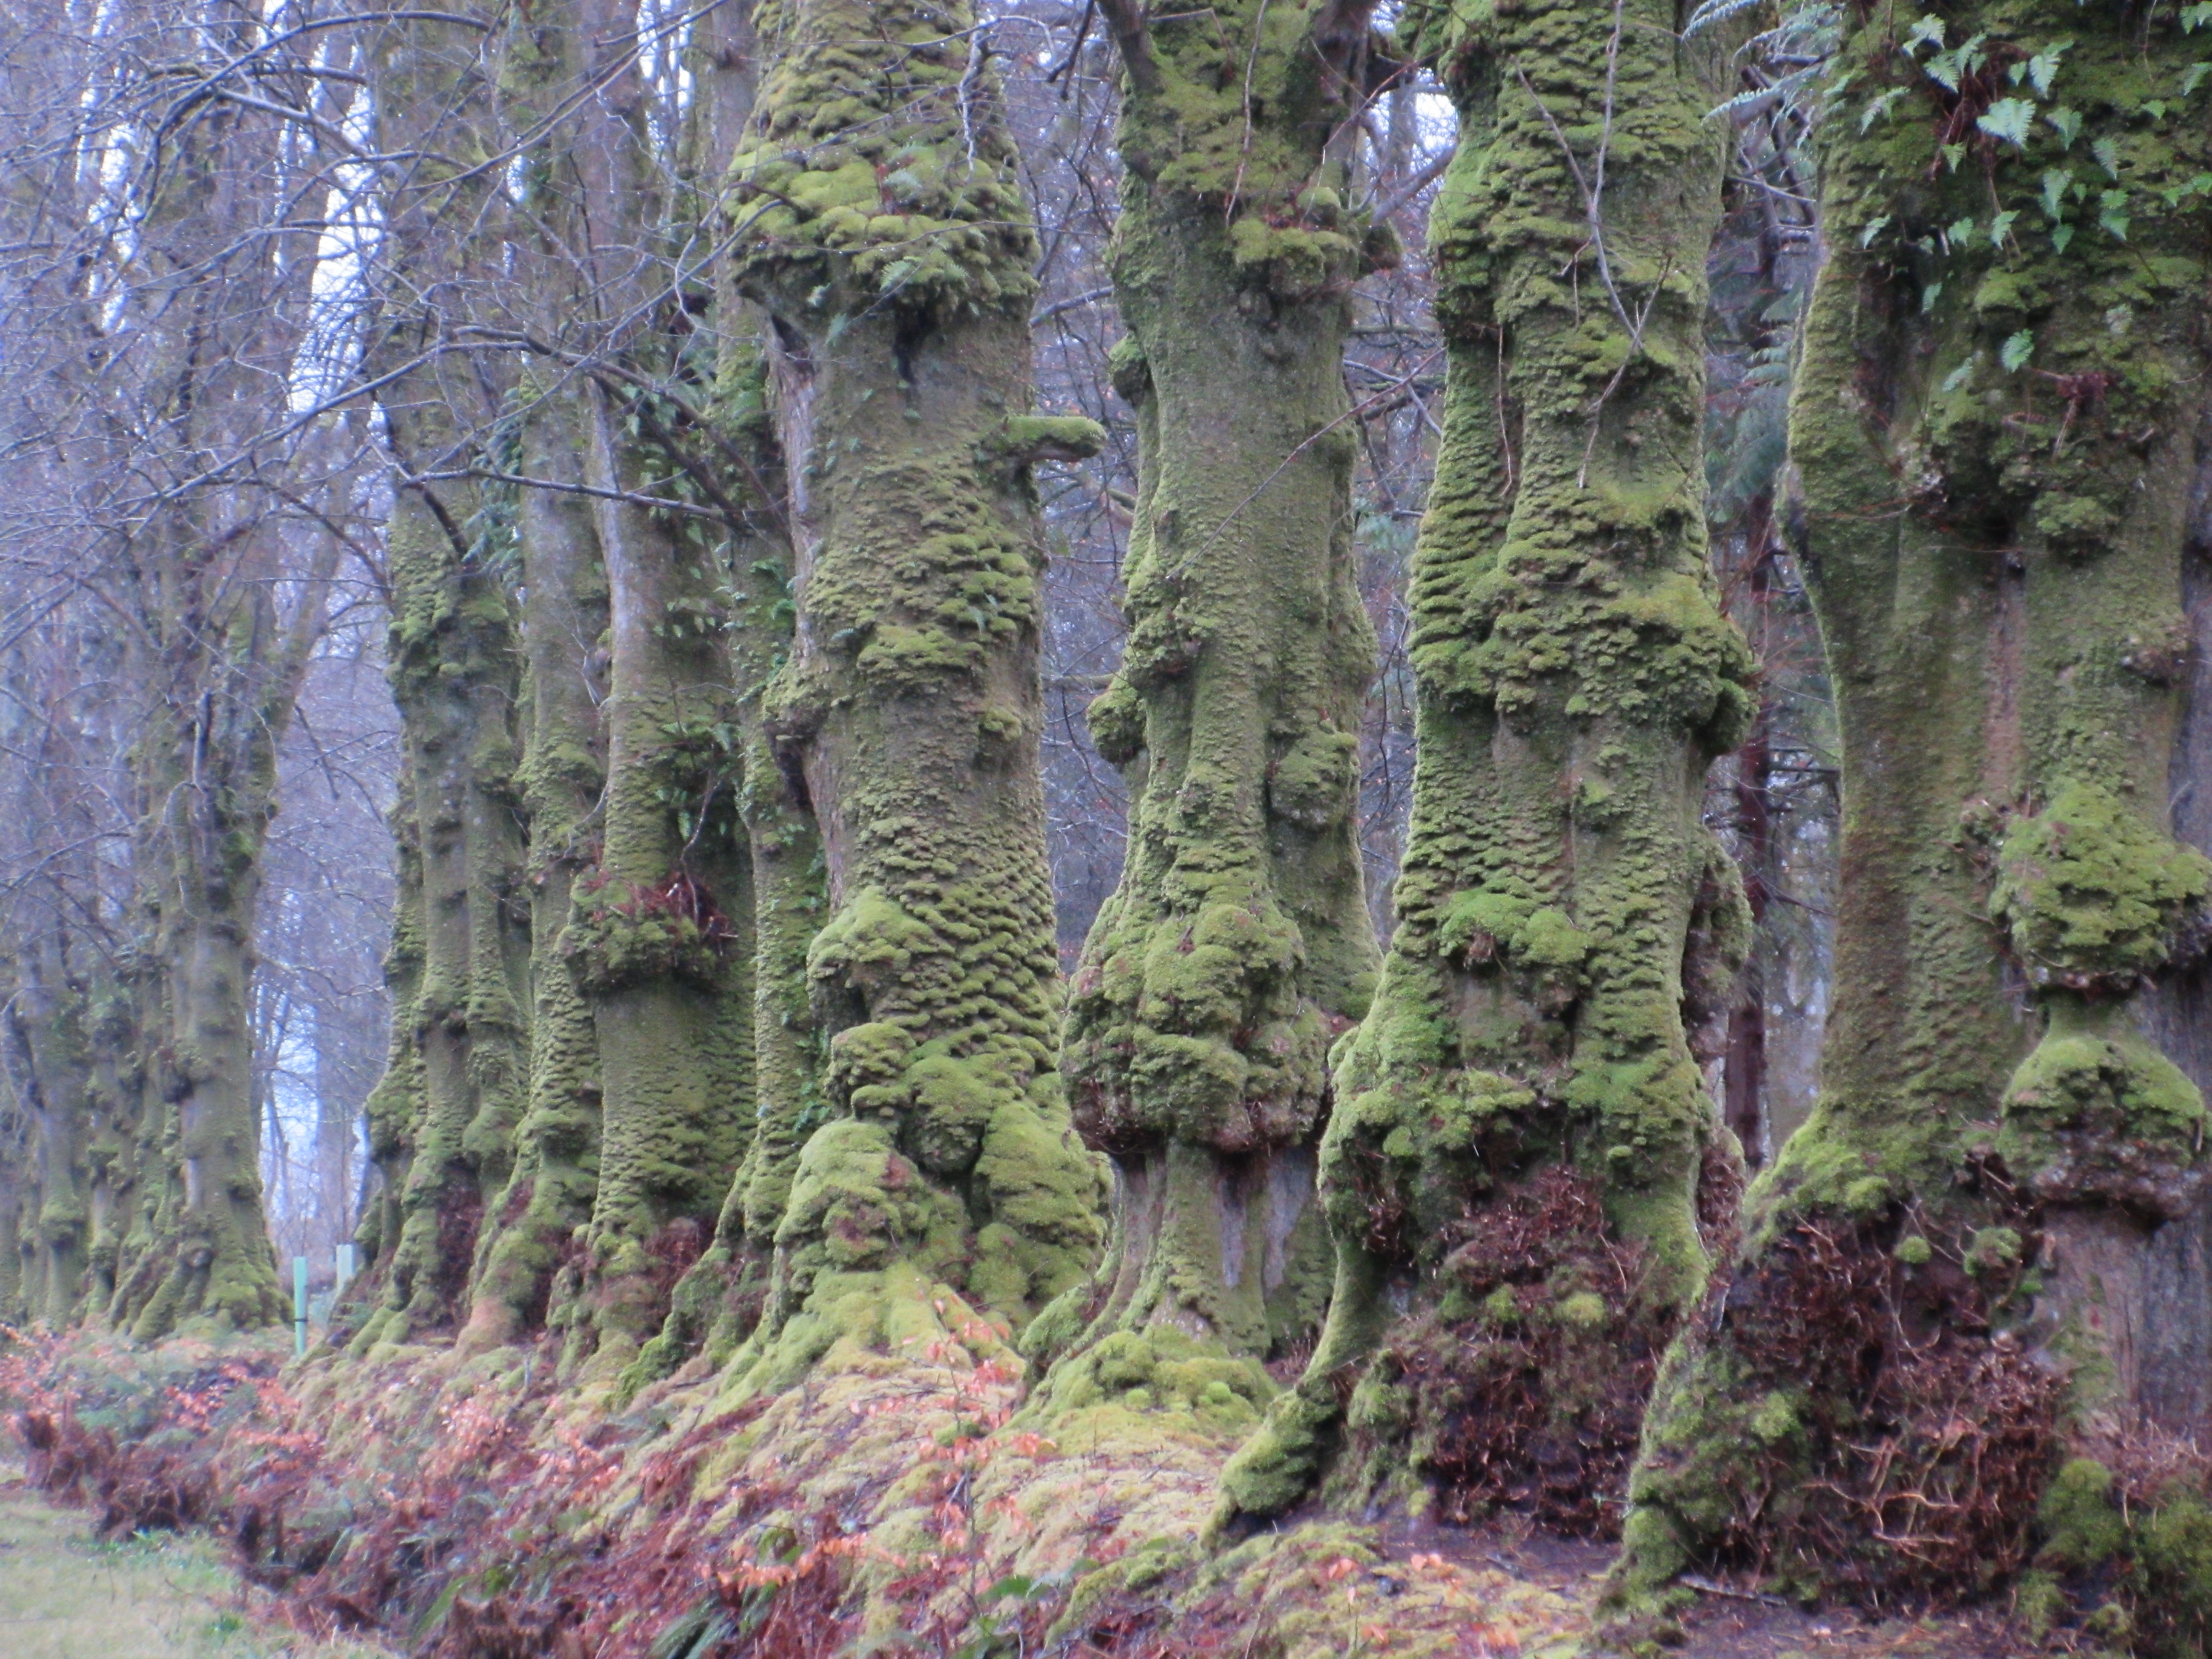 Moss-covered Trees in the Lime Avenue I, Mount Stuart, Bute, Scotland, 4 April 2018